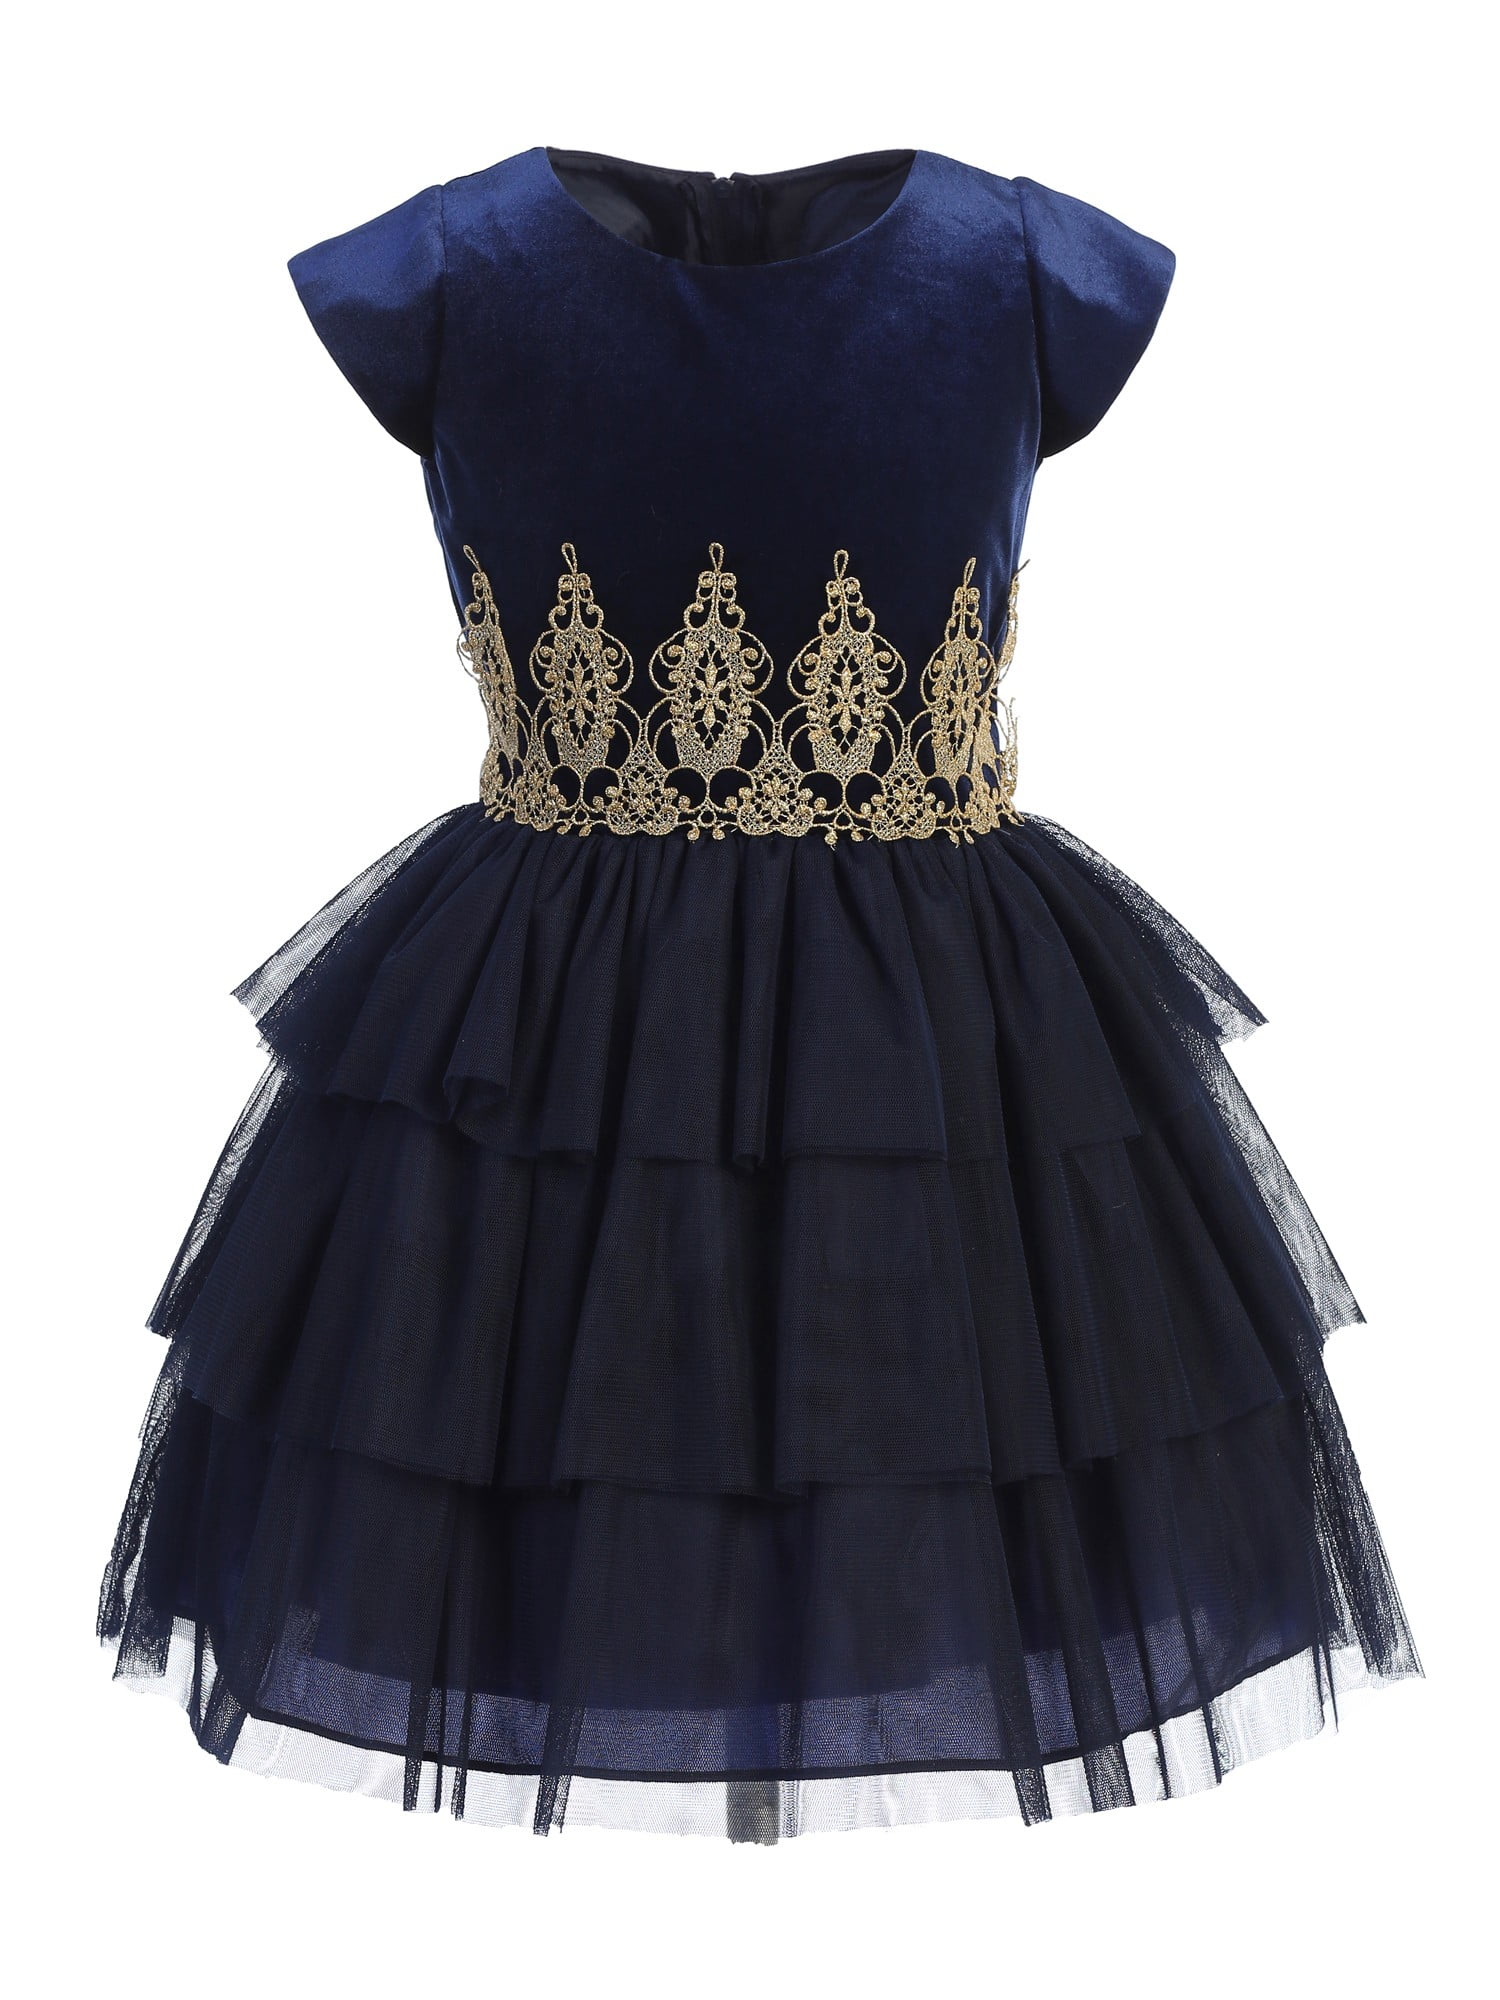 Sweet Kids Girls Navy Blue Rolled Lace ...